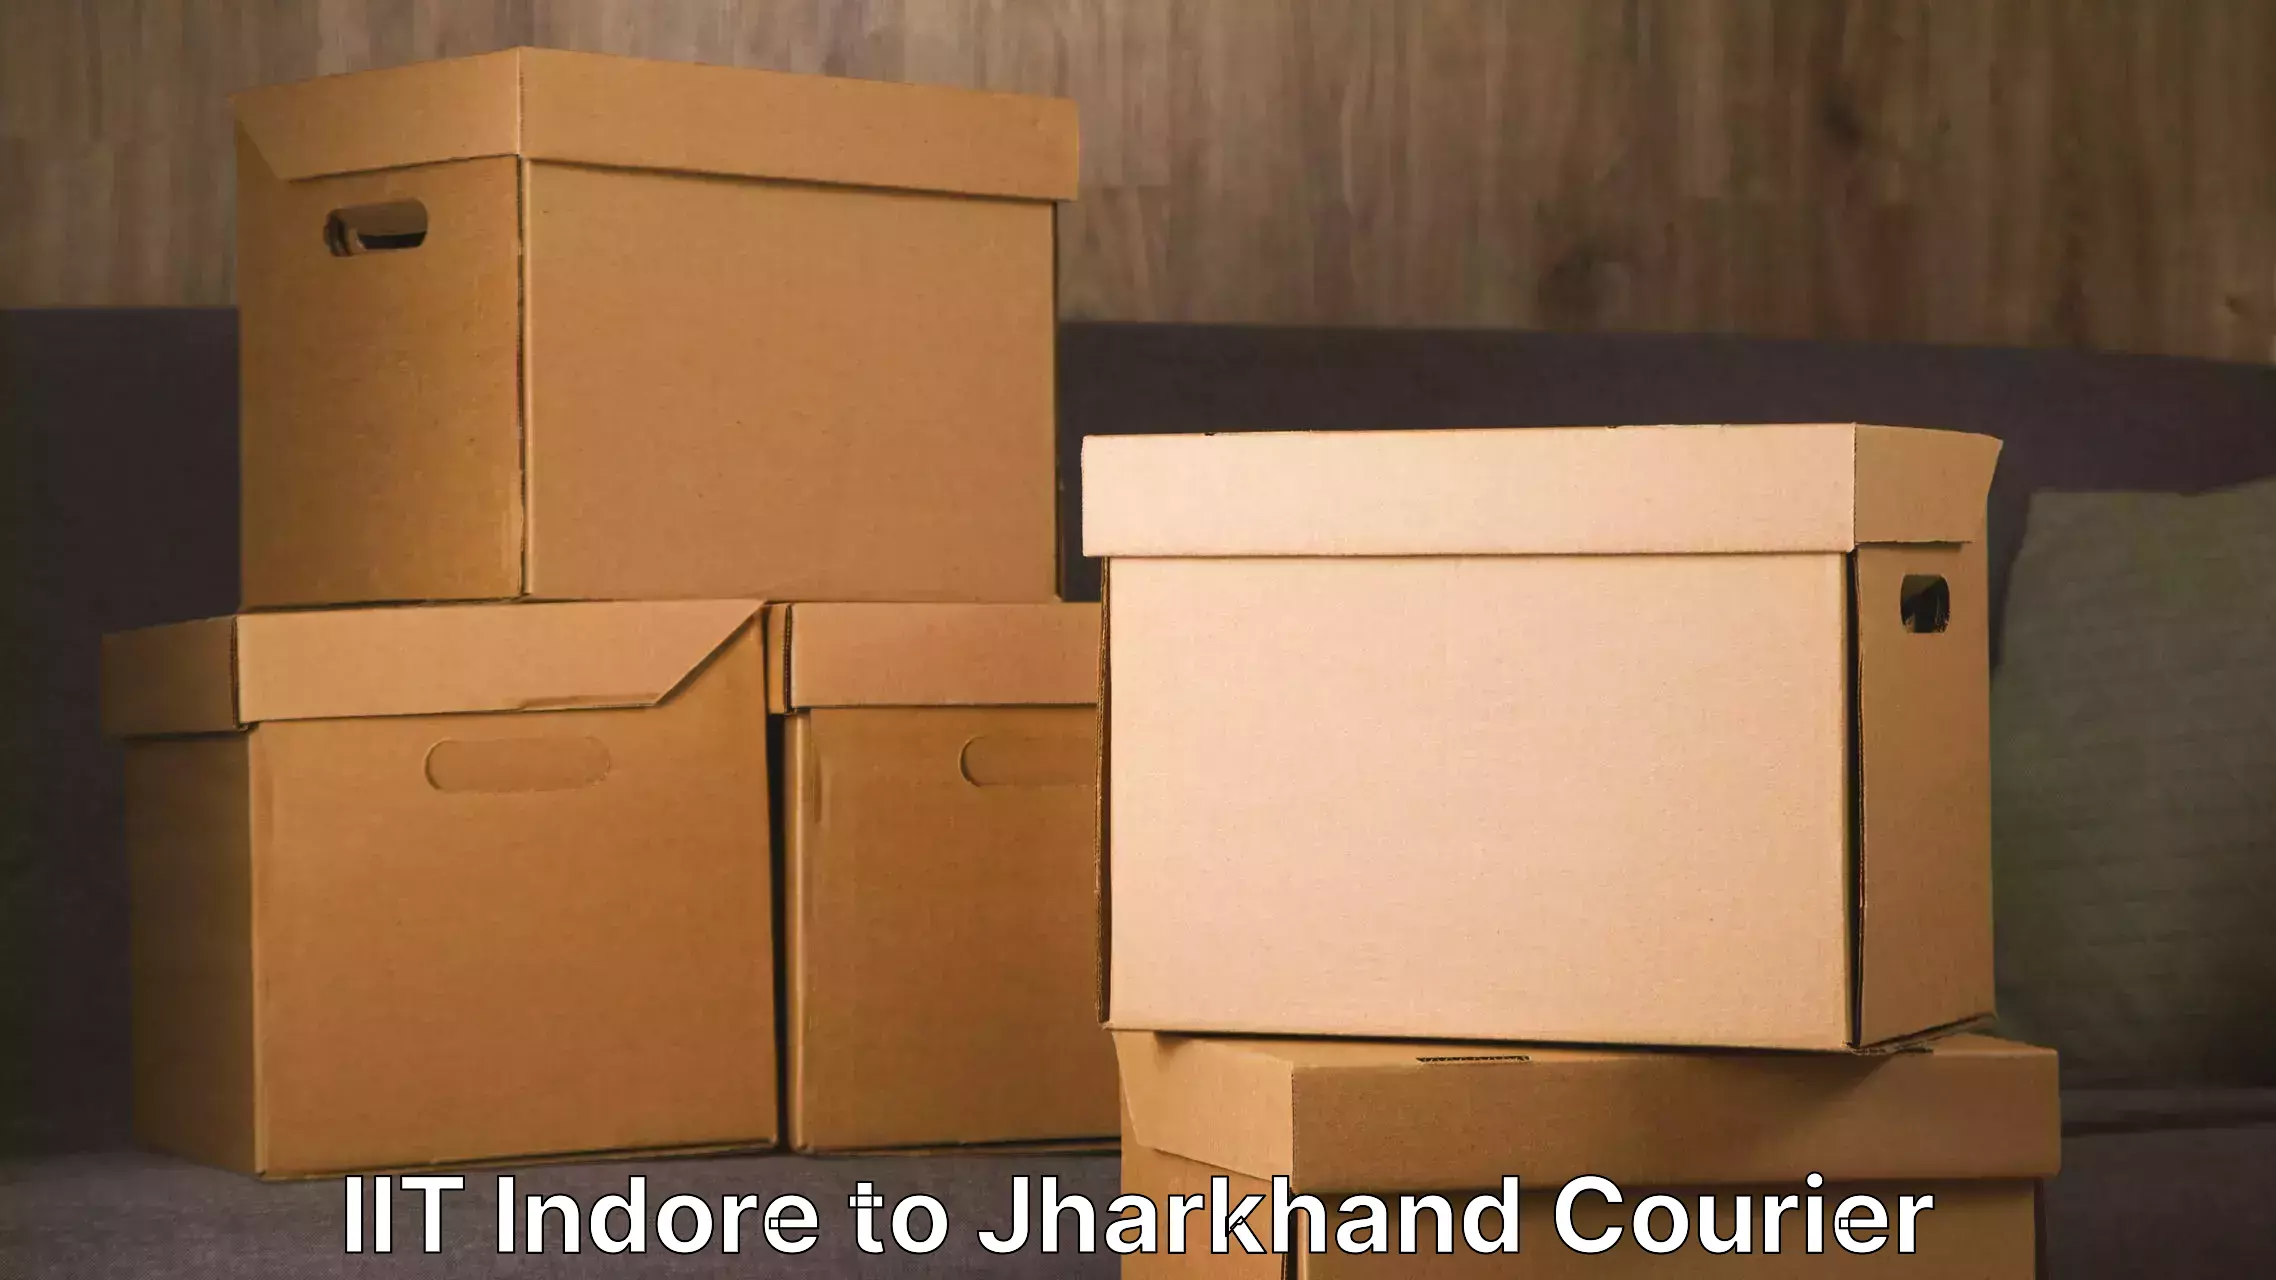 Home goods moving company IIT Indore to Bokaro Steel City